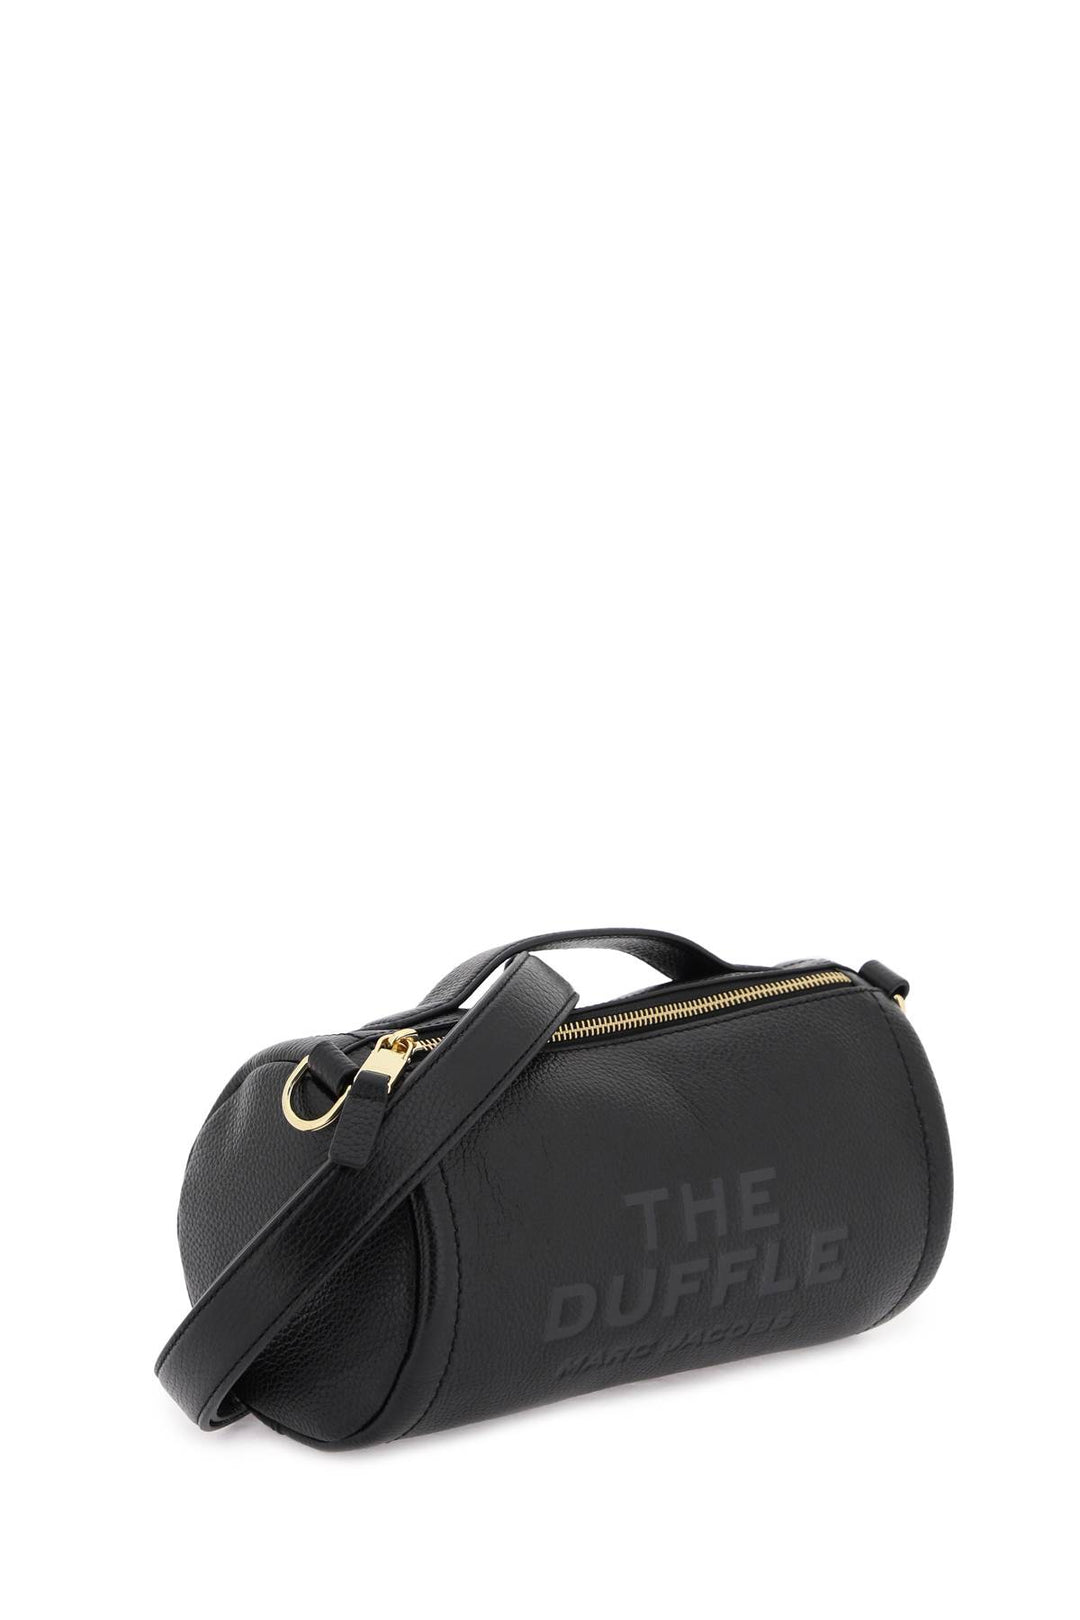 Marc Jacobs The Leather Duffle Bag   Black